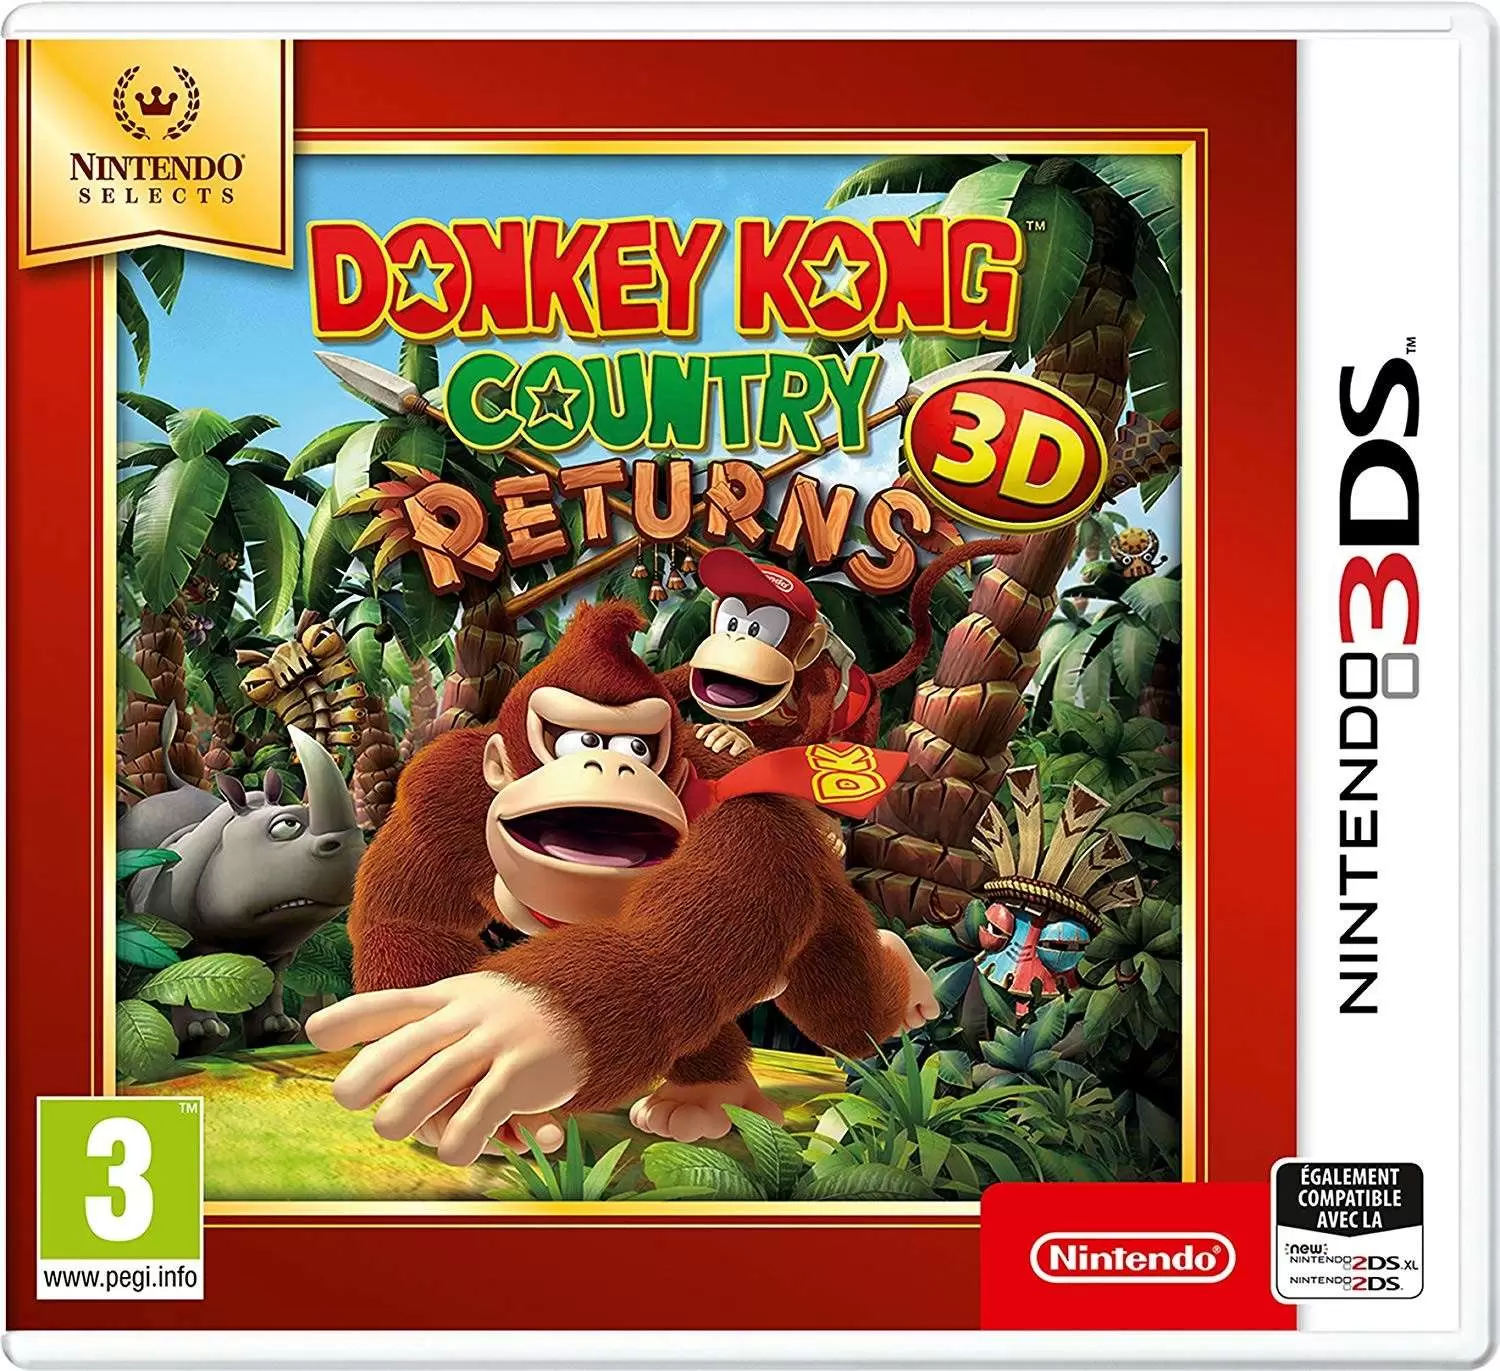 Nintendo 2DS / 3DS Games - Donkey Kong Country Returns (Nintendo Selects)